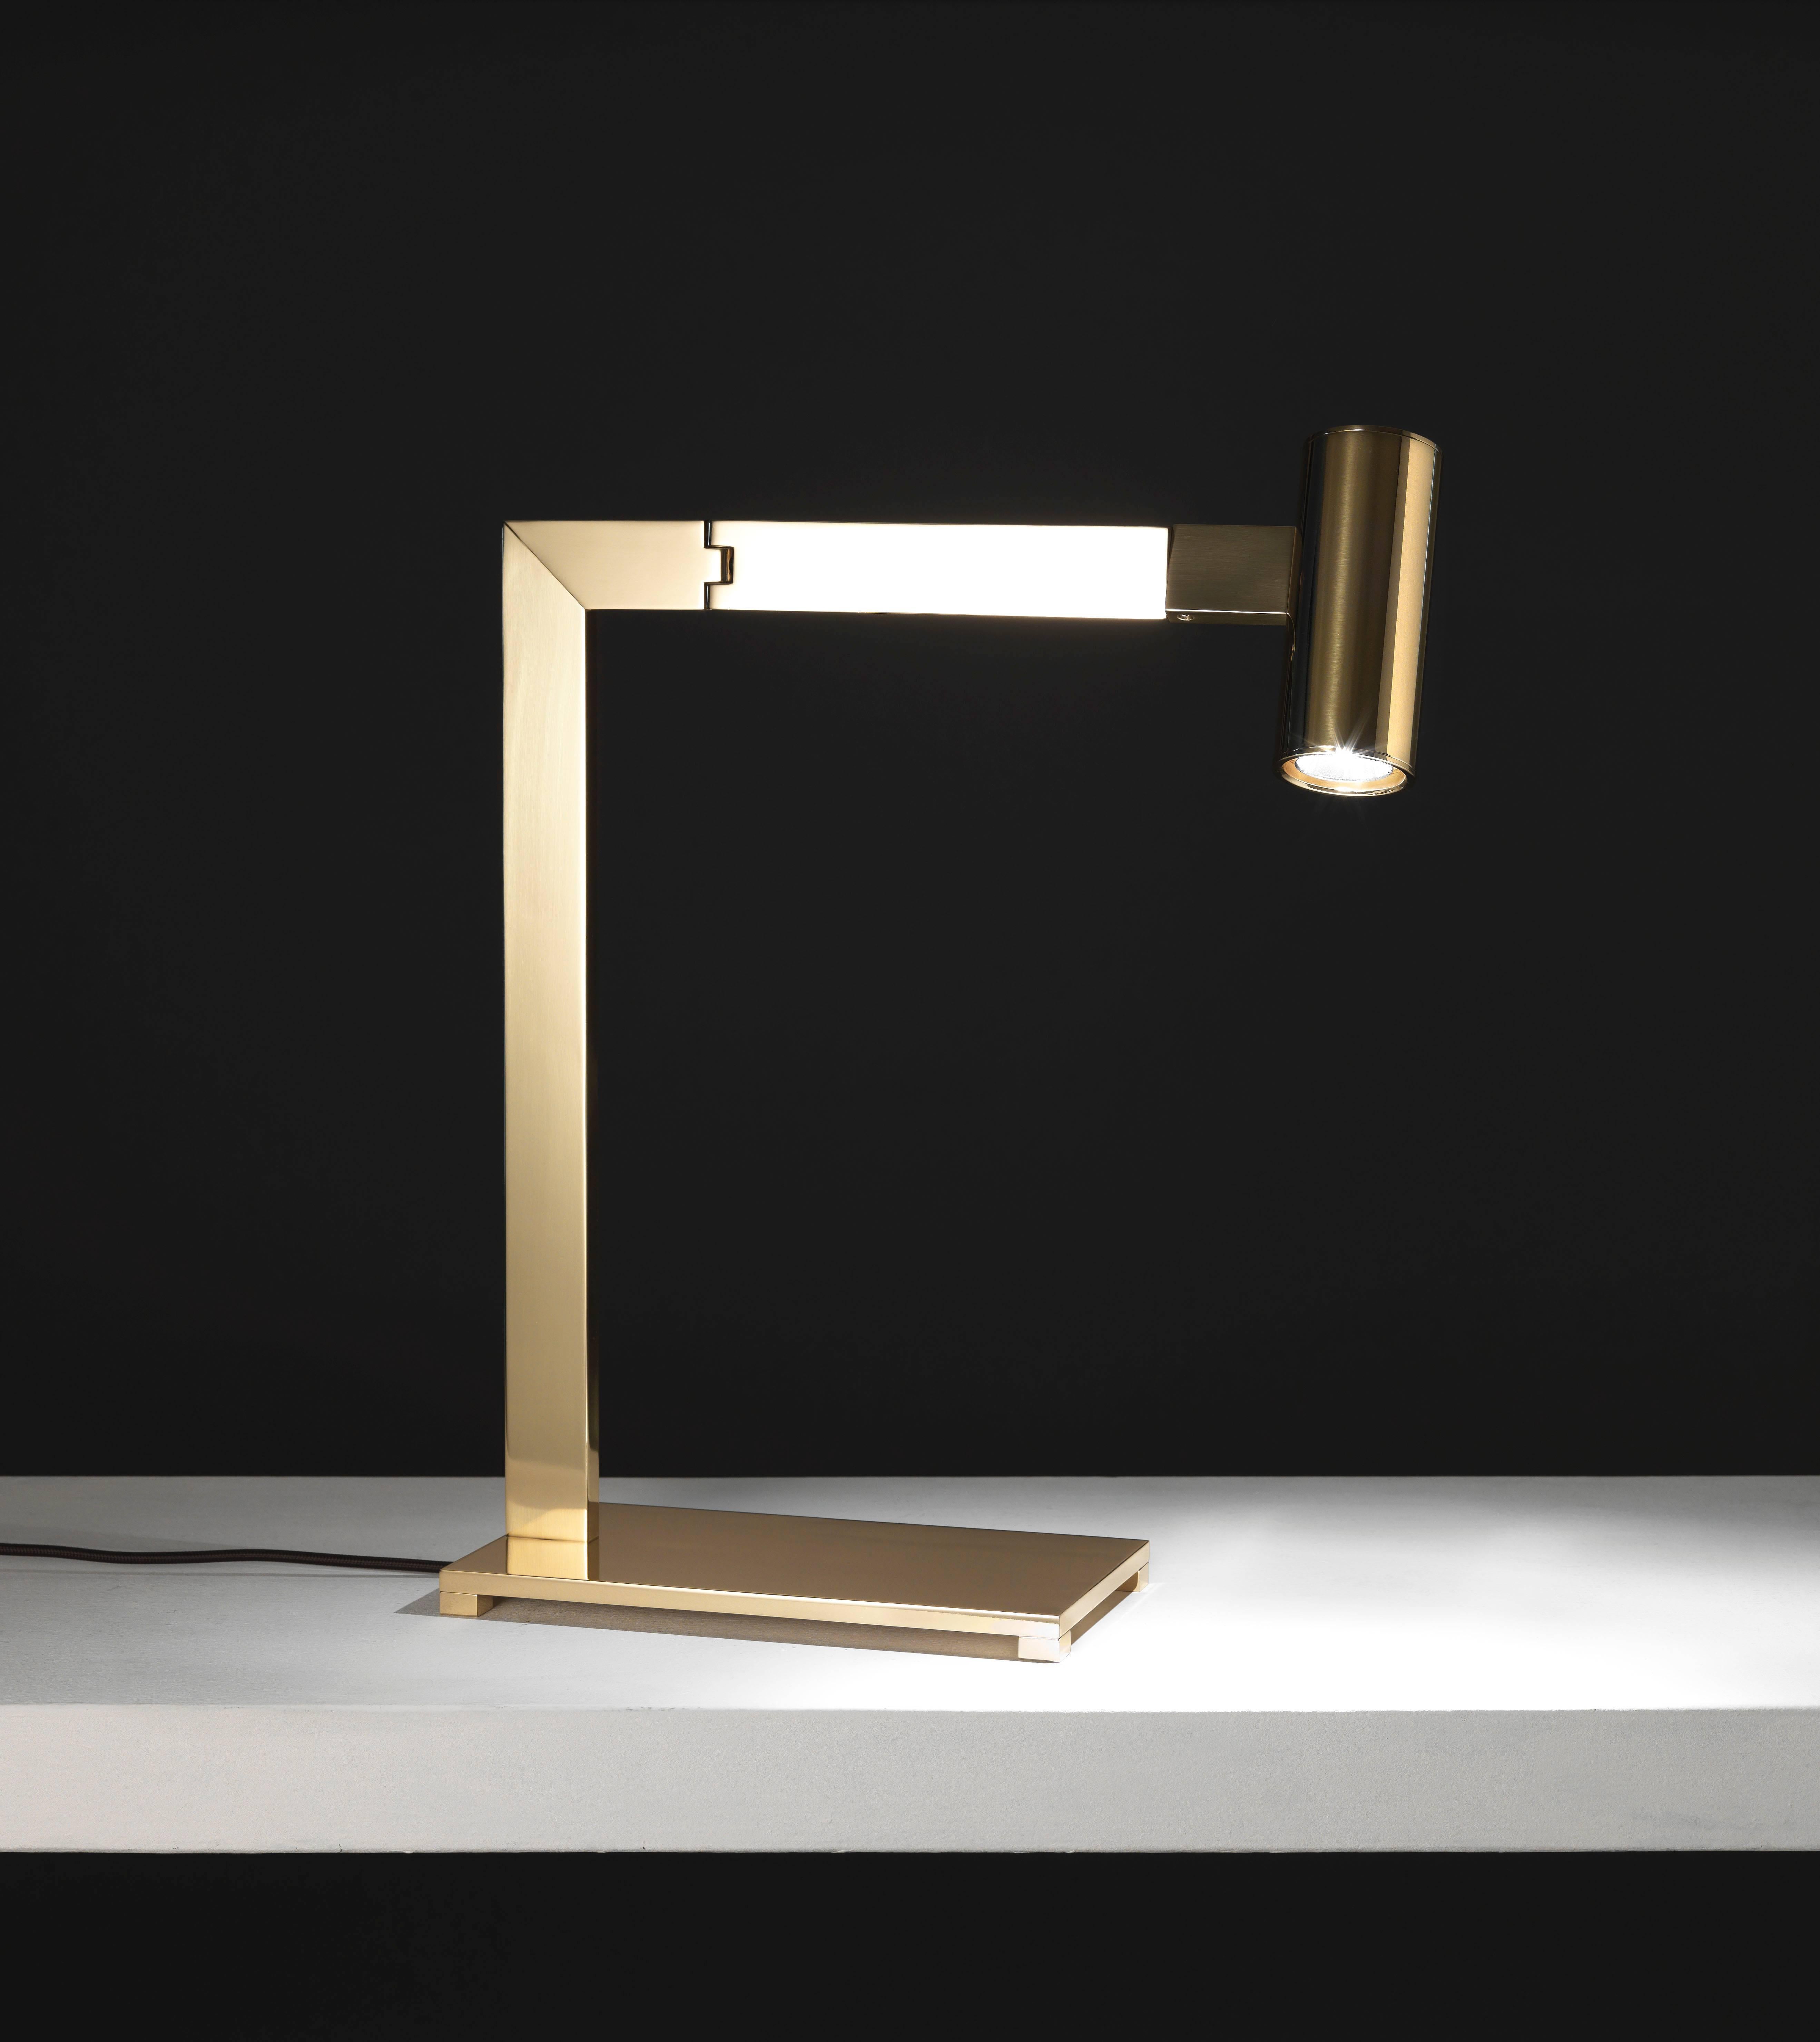 Beautiful table lamp.
Lacquers, brass and chrome finishes available.
Designer: William Pianta.
100% Made in Italy.
*price shown is for Black Lacquer Version